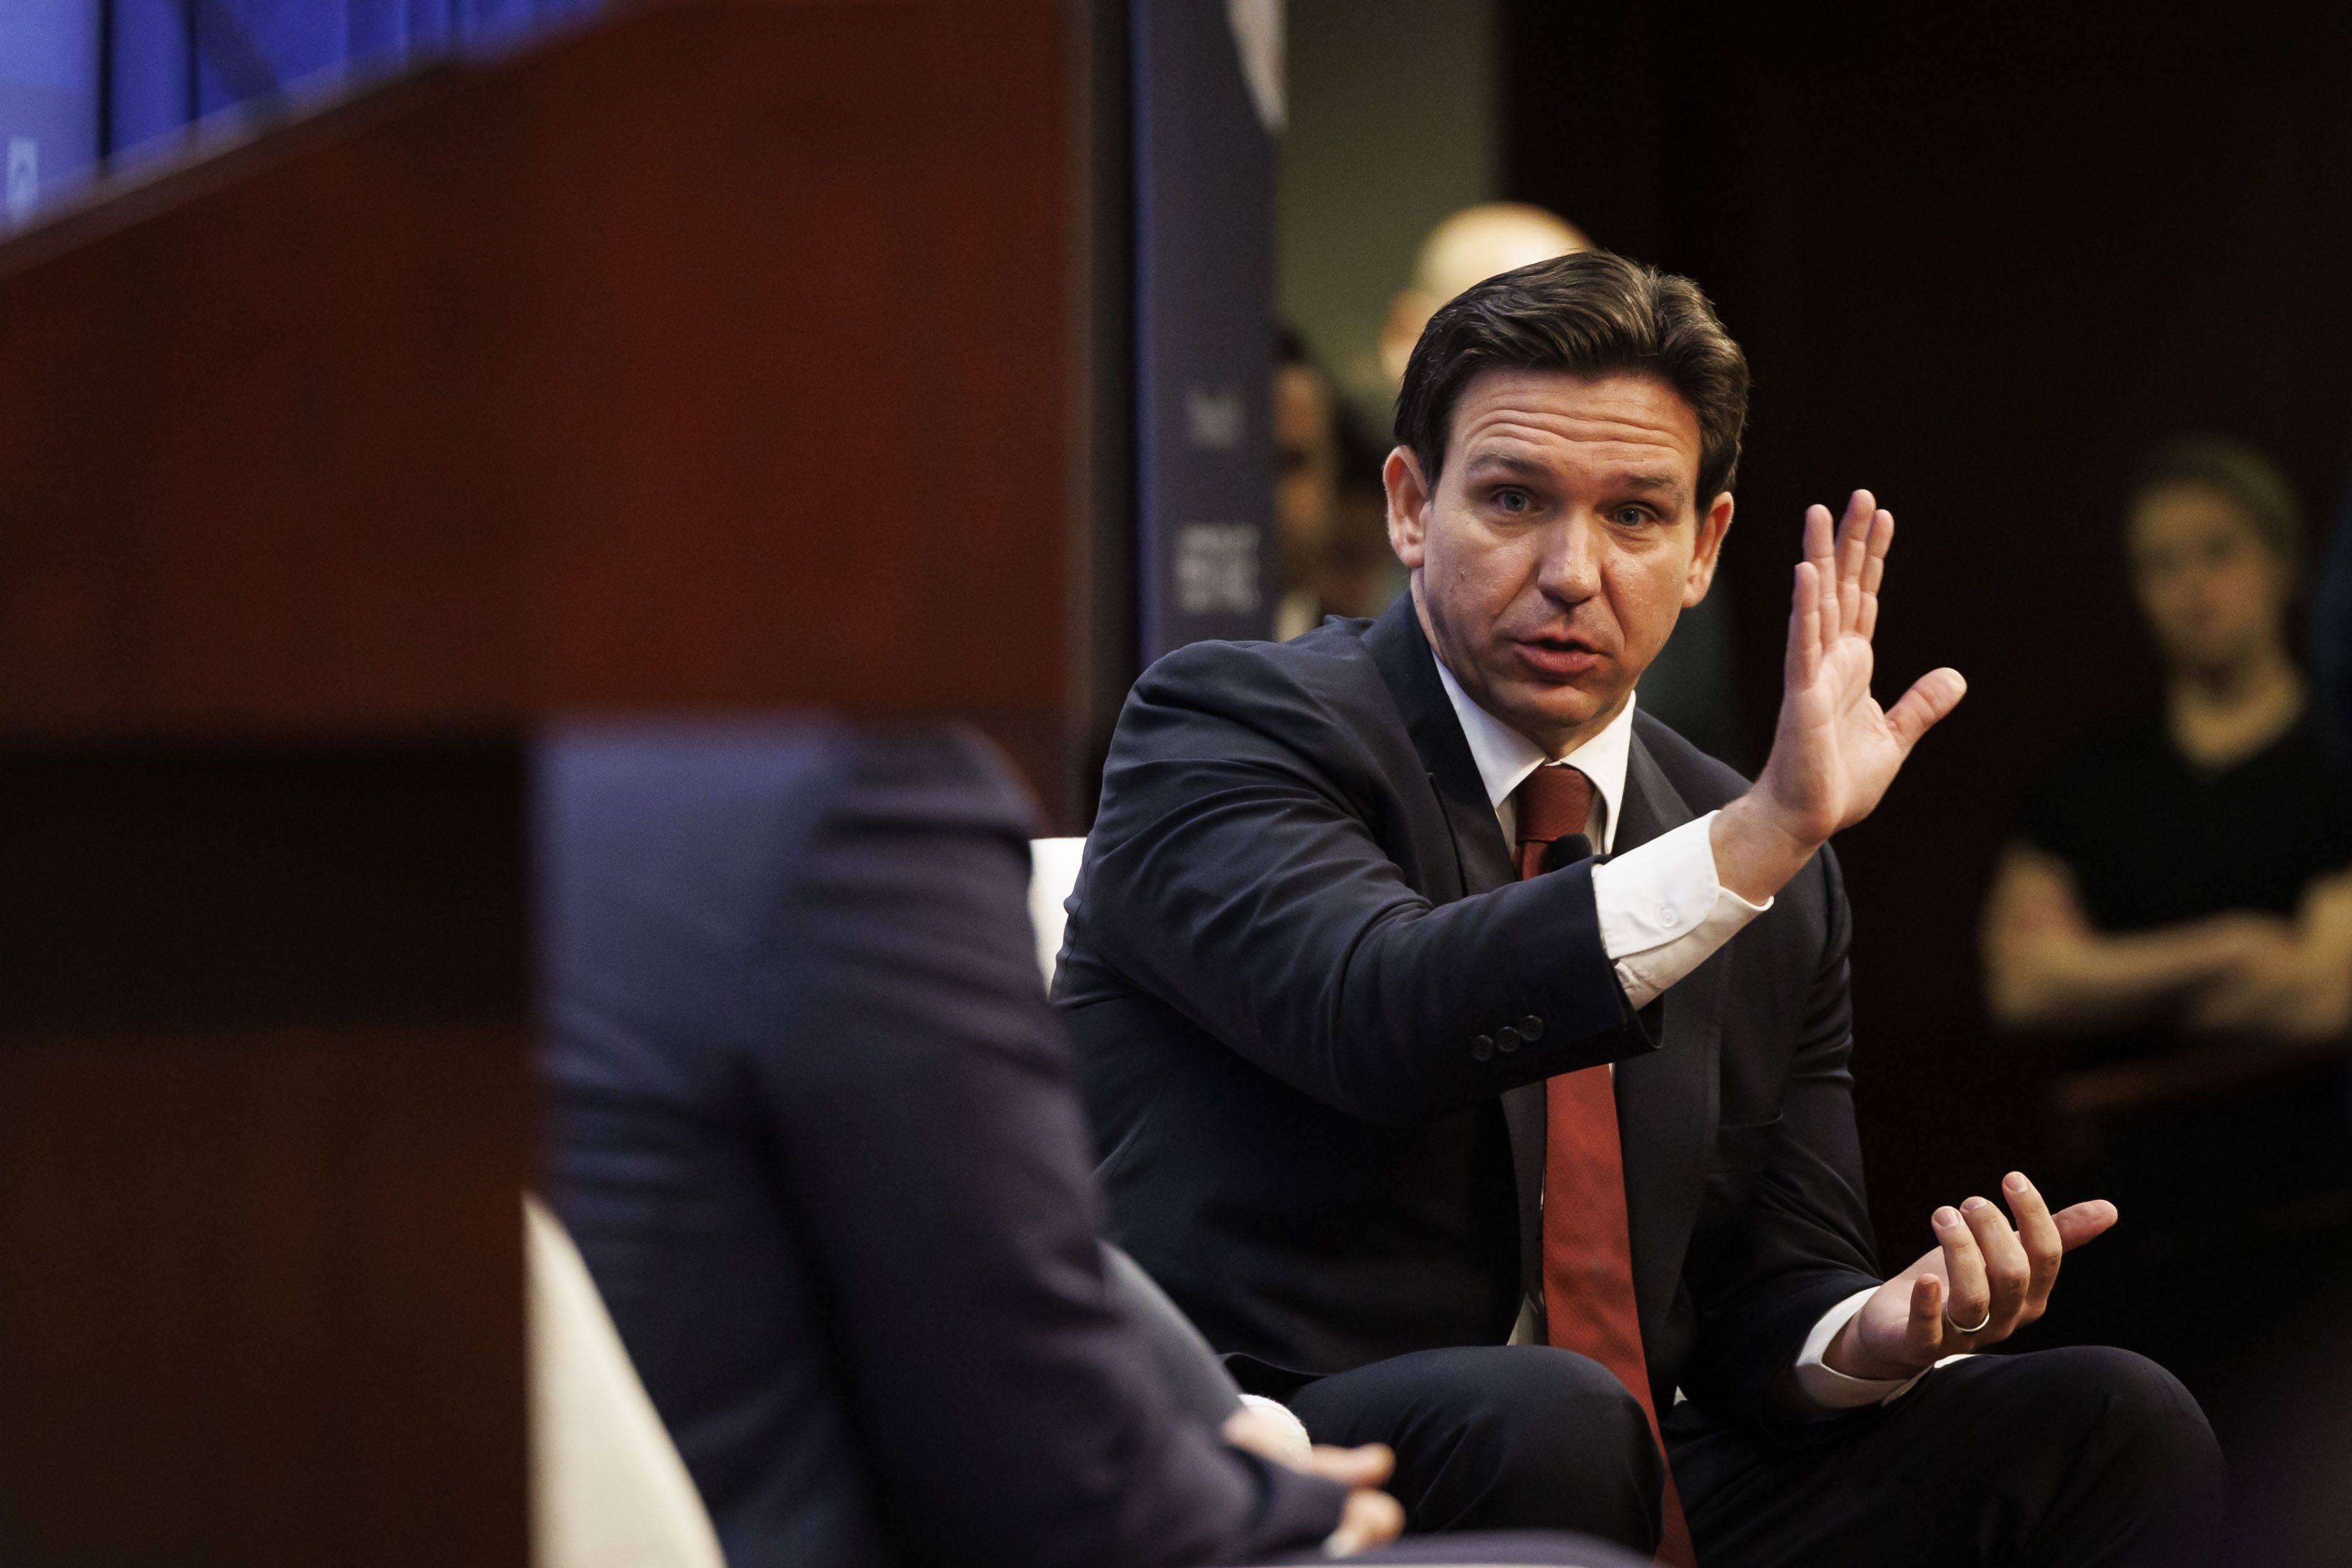 2024 Republican US presidential candidate Ron DeSantis speaks during an event at the Heritage Foundation in Washington on Friday. Photo: Bloomberg